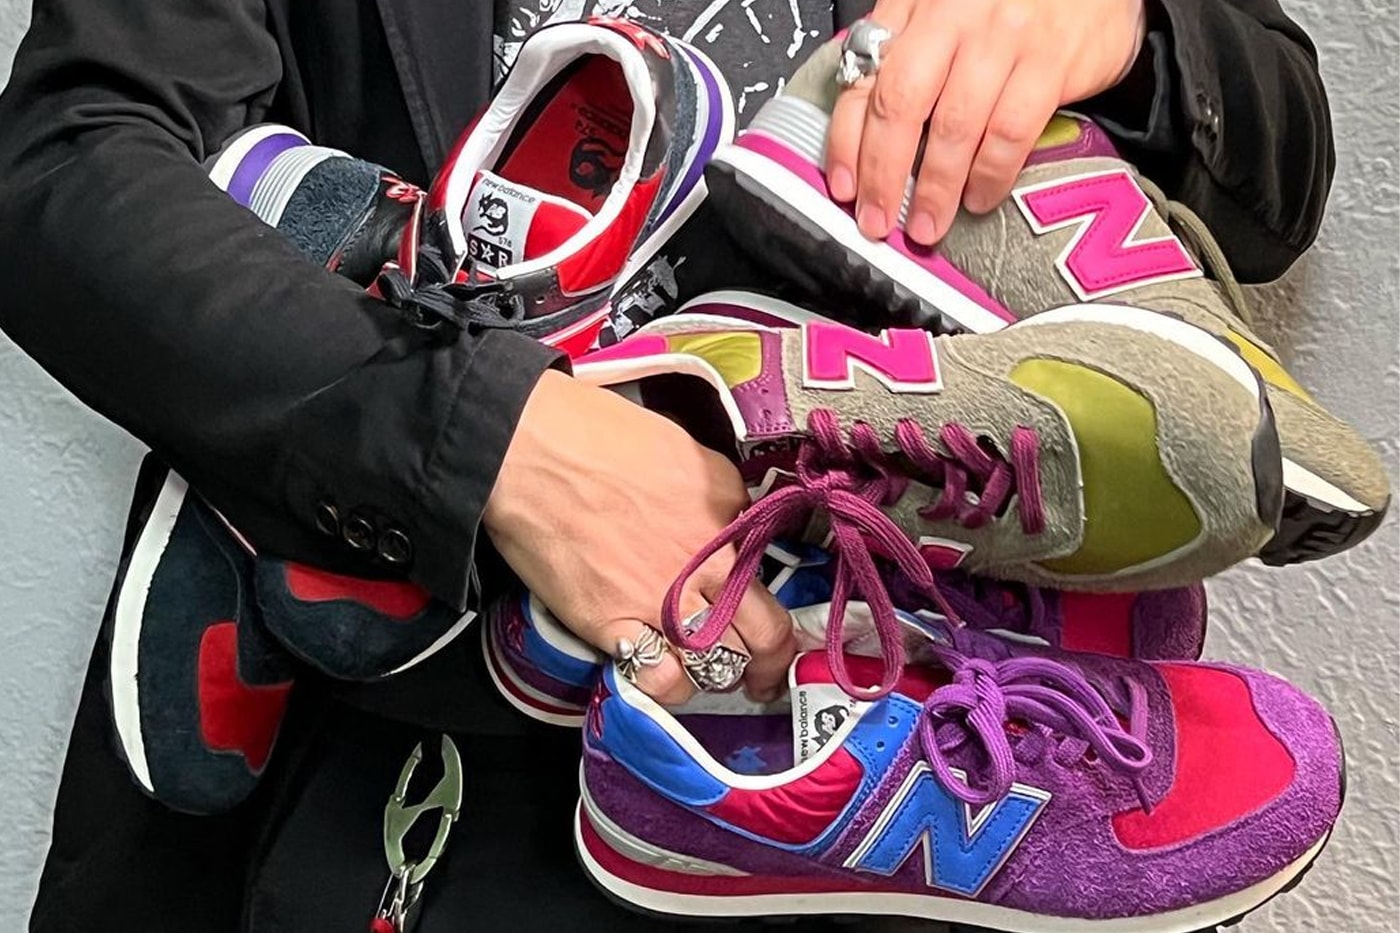 Stray Rats Teases Upcoming New Balance 574 Summer Collaboration sneakers colorful hues bold graphic heavy julian consuegra fuct jr erwing